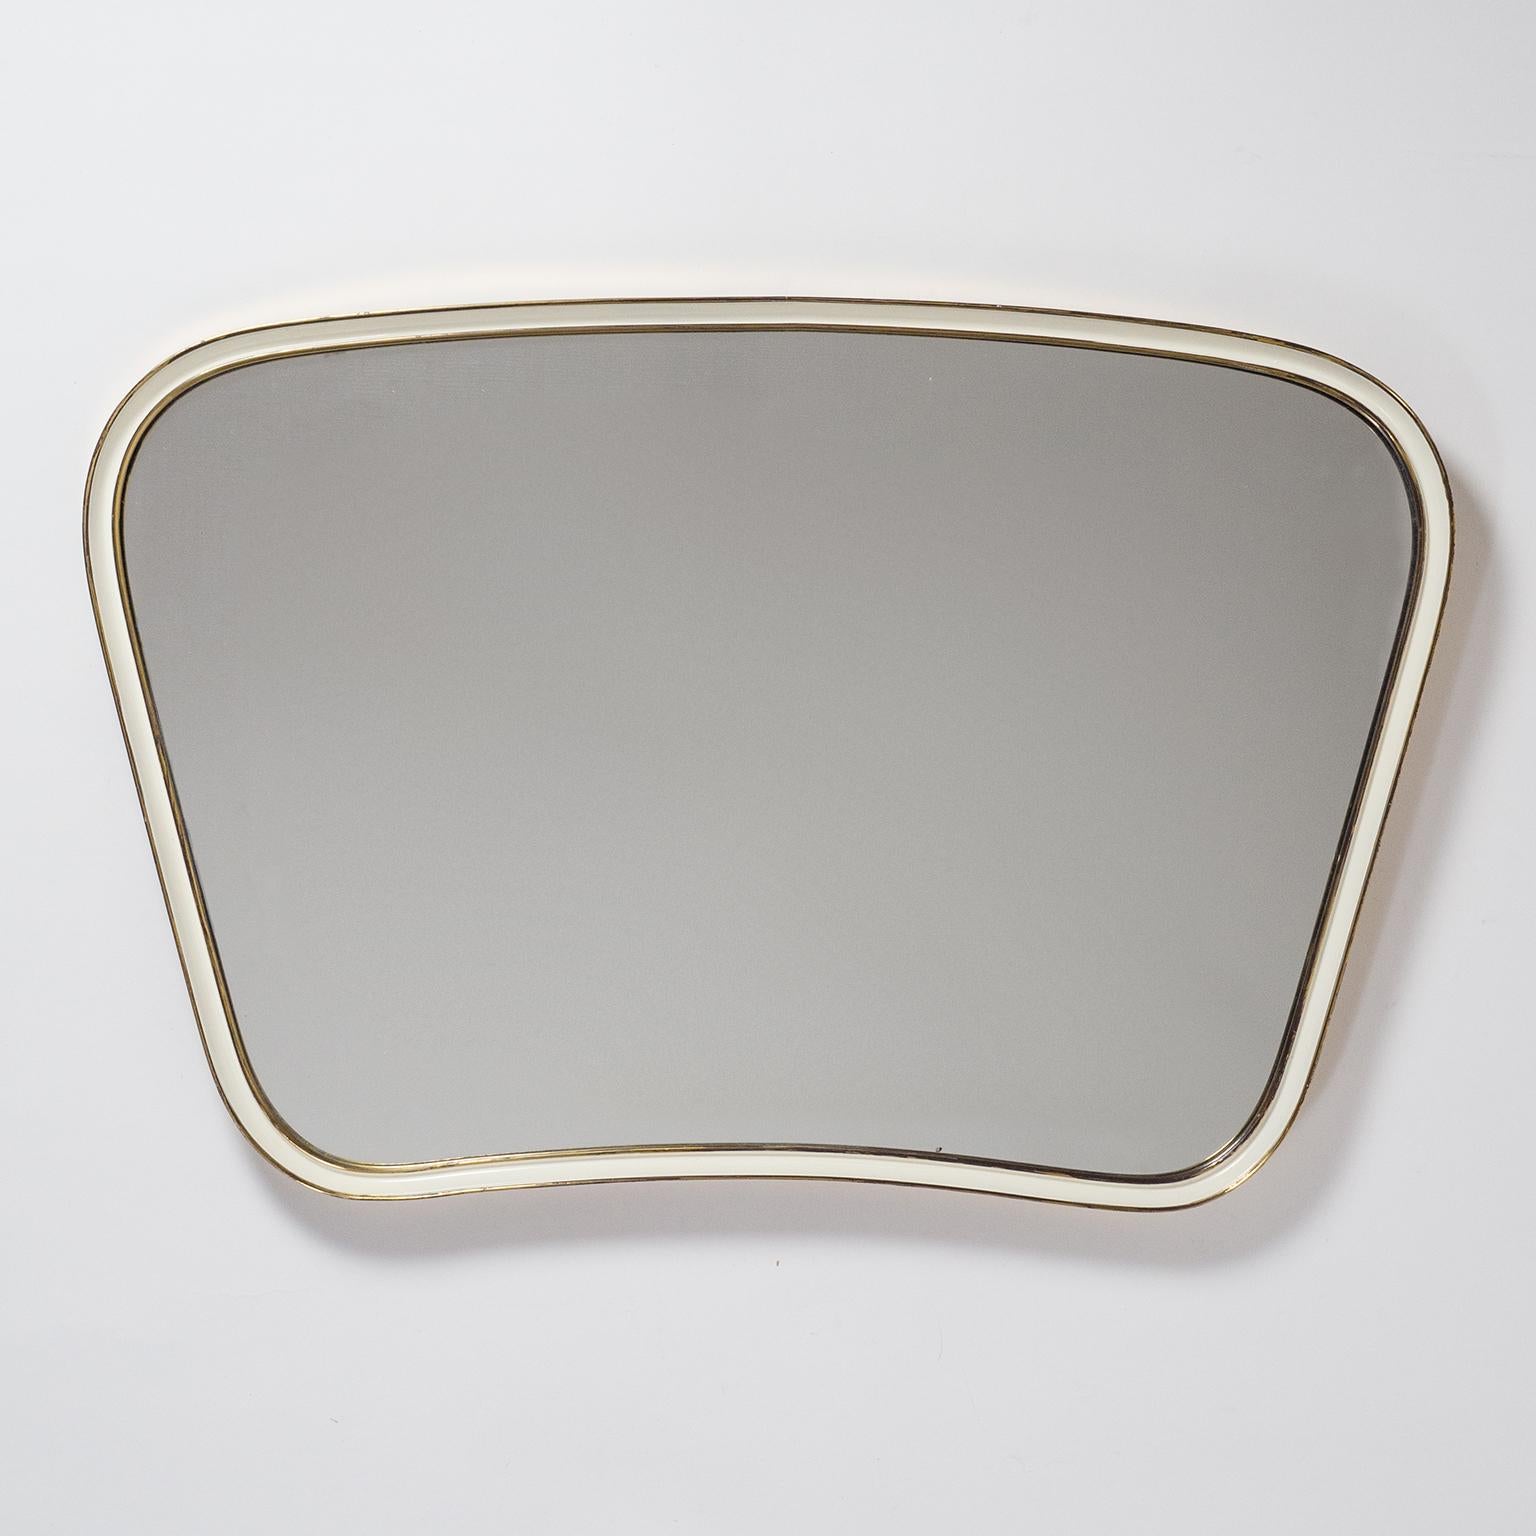 Beautiful midcentury curved brass mirror from 1950s. An unusually thick continuous brass frame which also curves towards the outside and has an off-white enamel coating on the inlet. Very nice original condition with patina on the brass and some